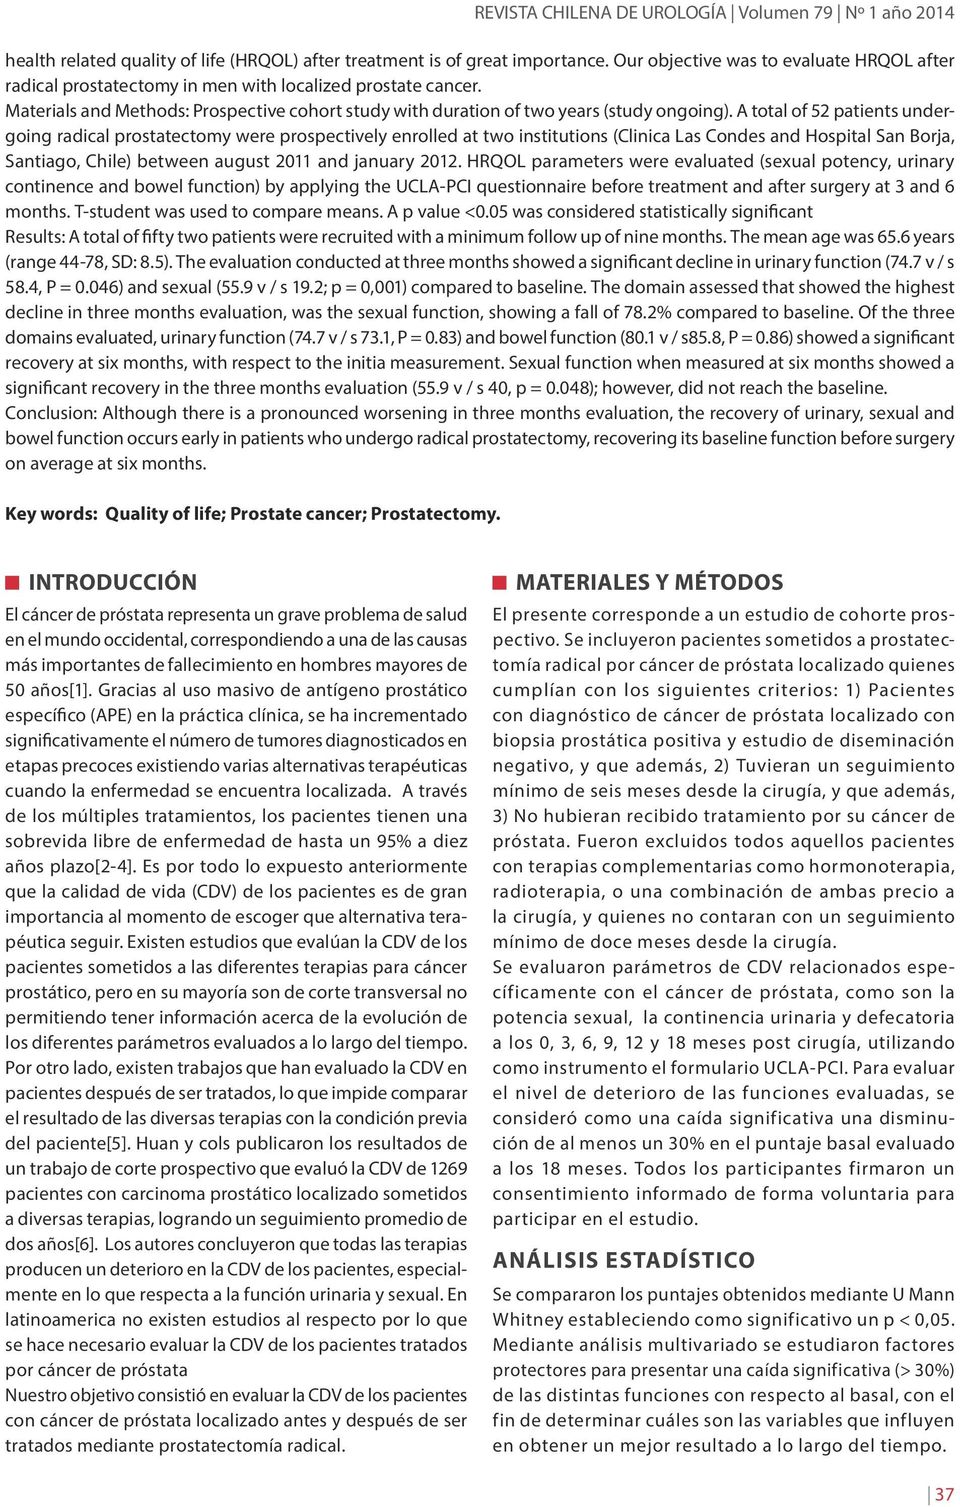 A total of 52 patients undergoing radical prostatectomy were prospectively enrolled at two institutions (Clinica Las Condes and Hospital San Borja, Santiago, Chile) between august 2011 and january